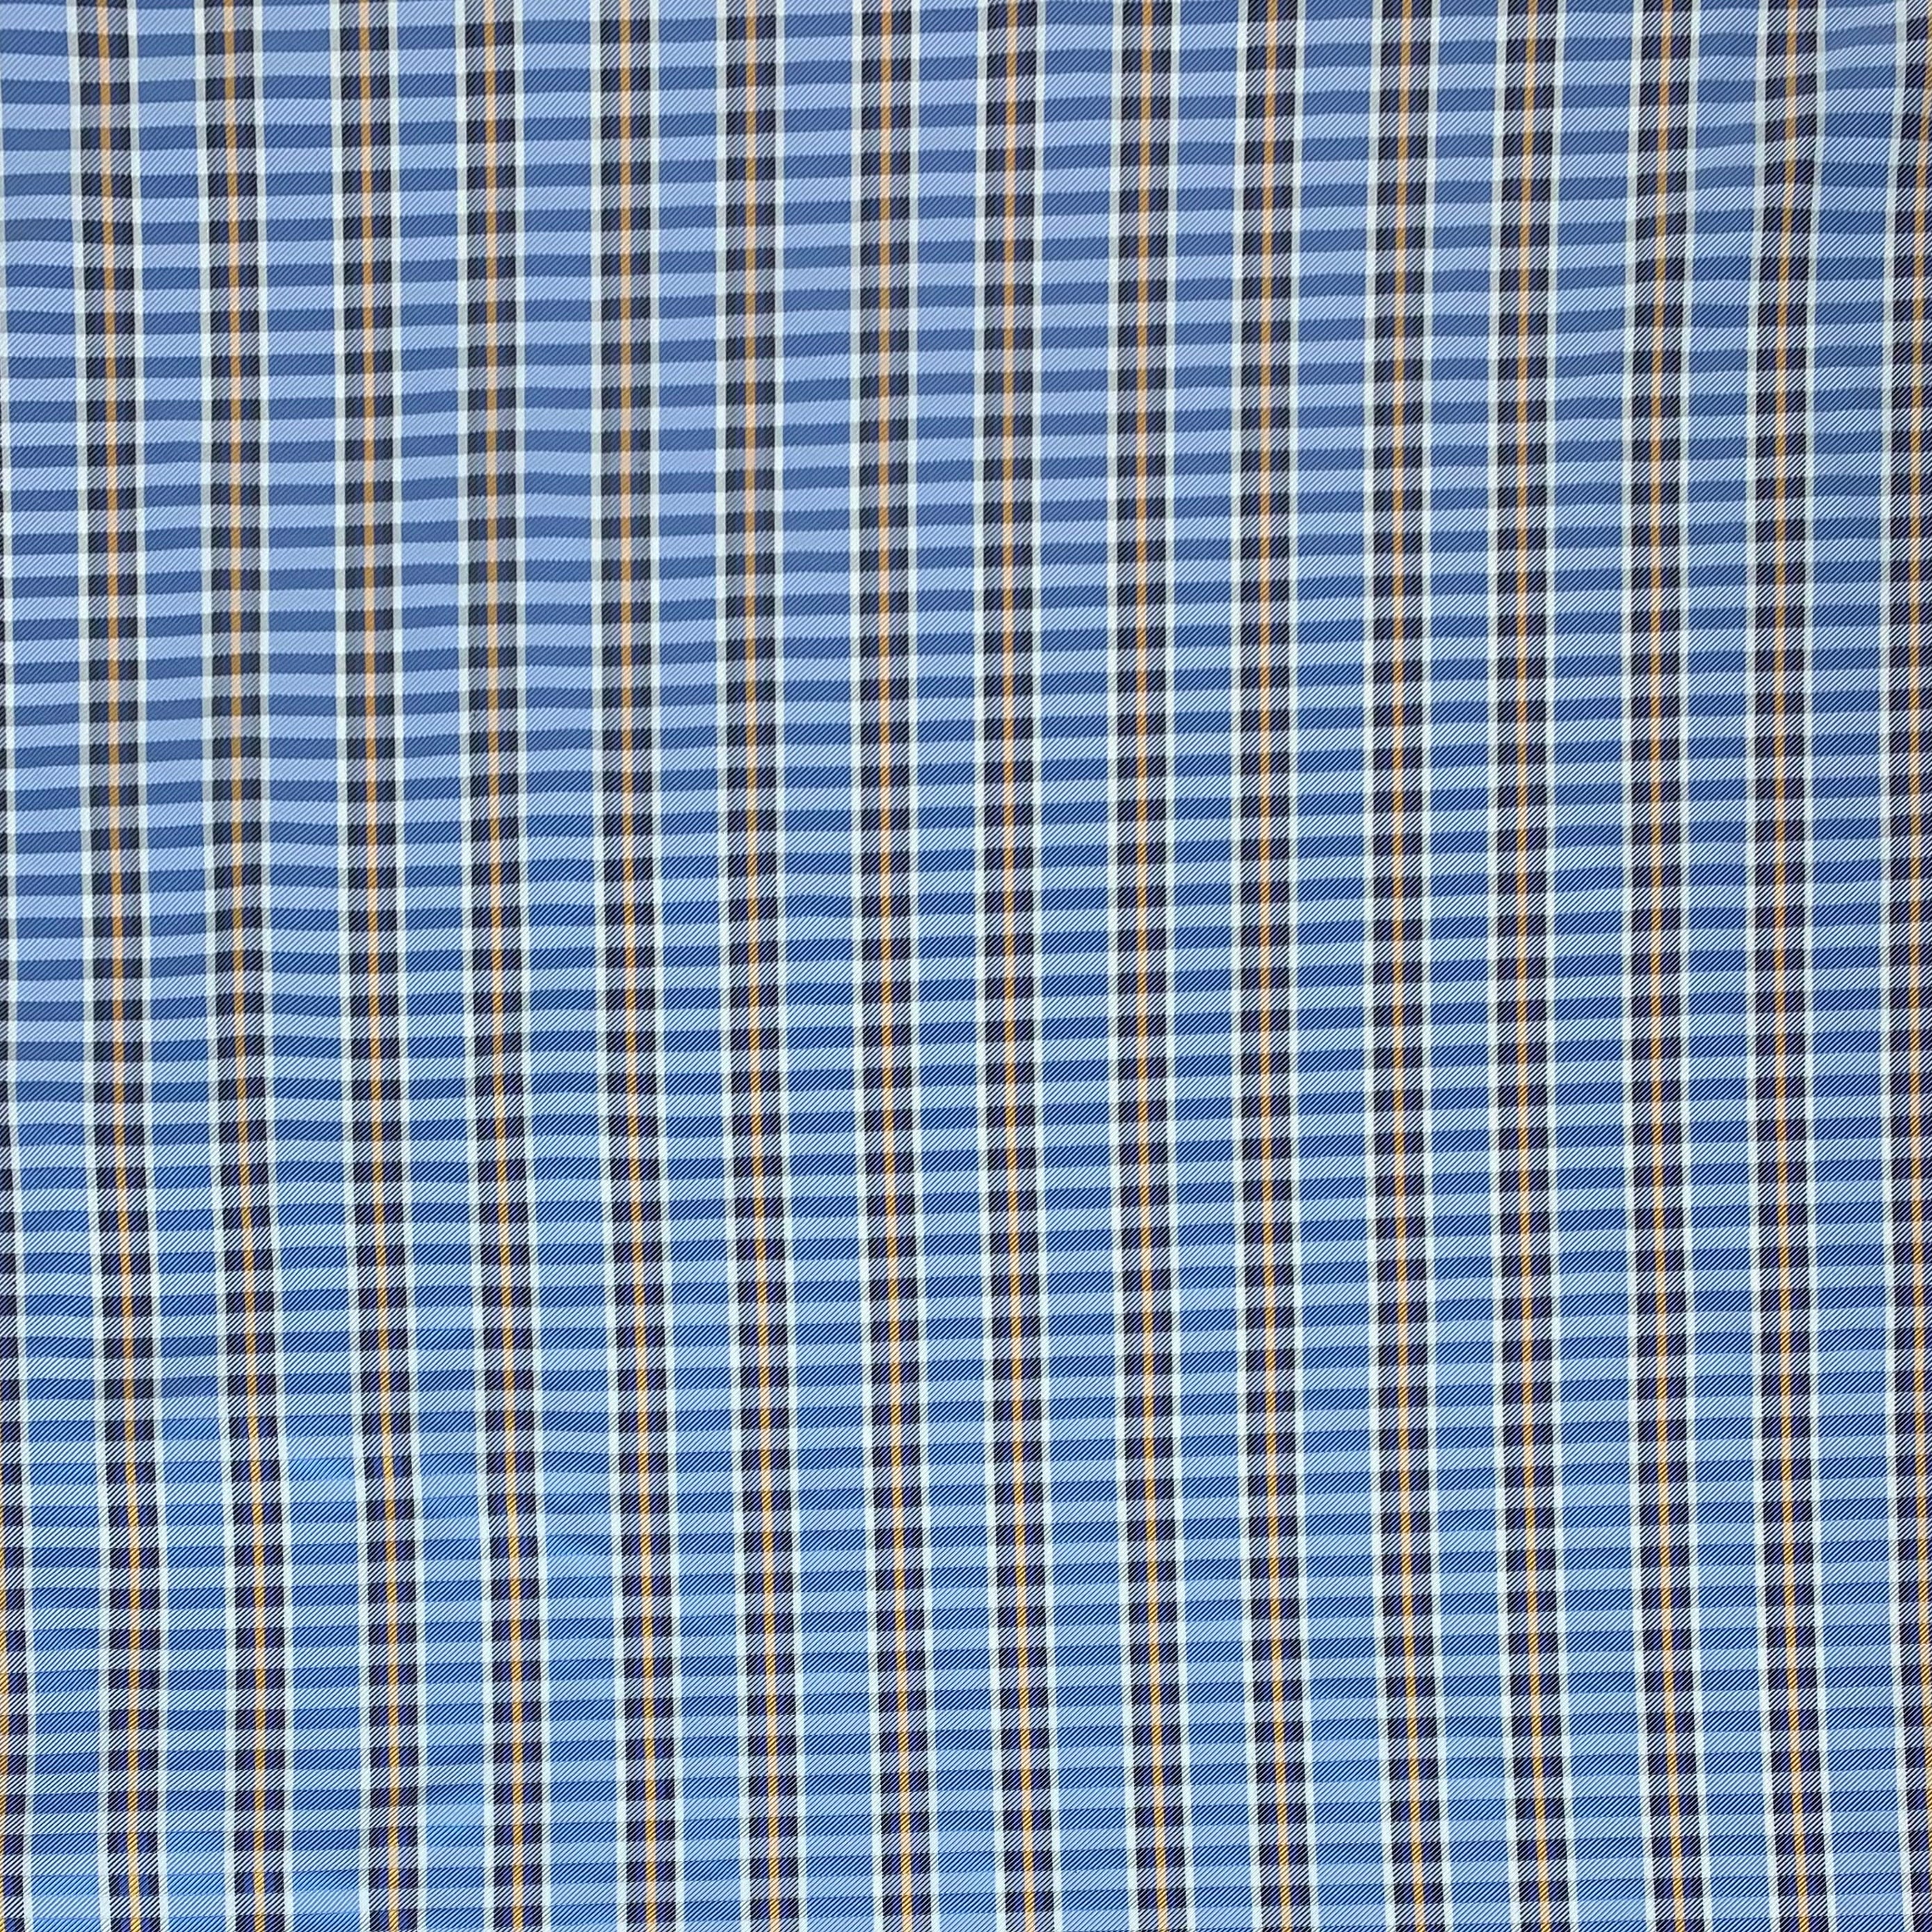 Plaid Silk/Polyester - Blue / White / Yellow - Remnant